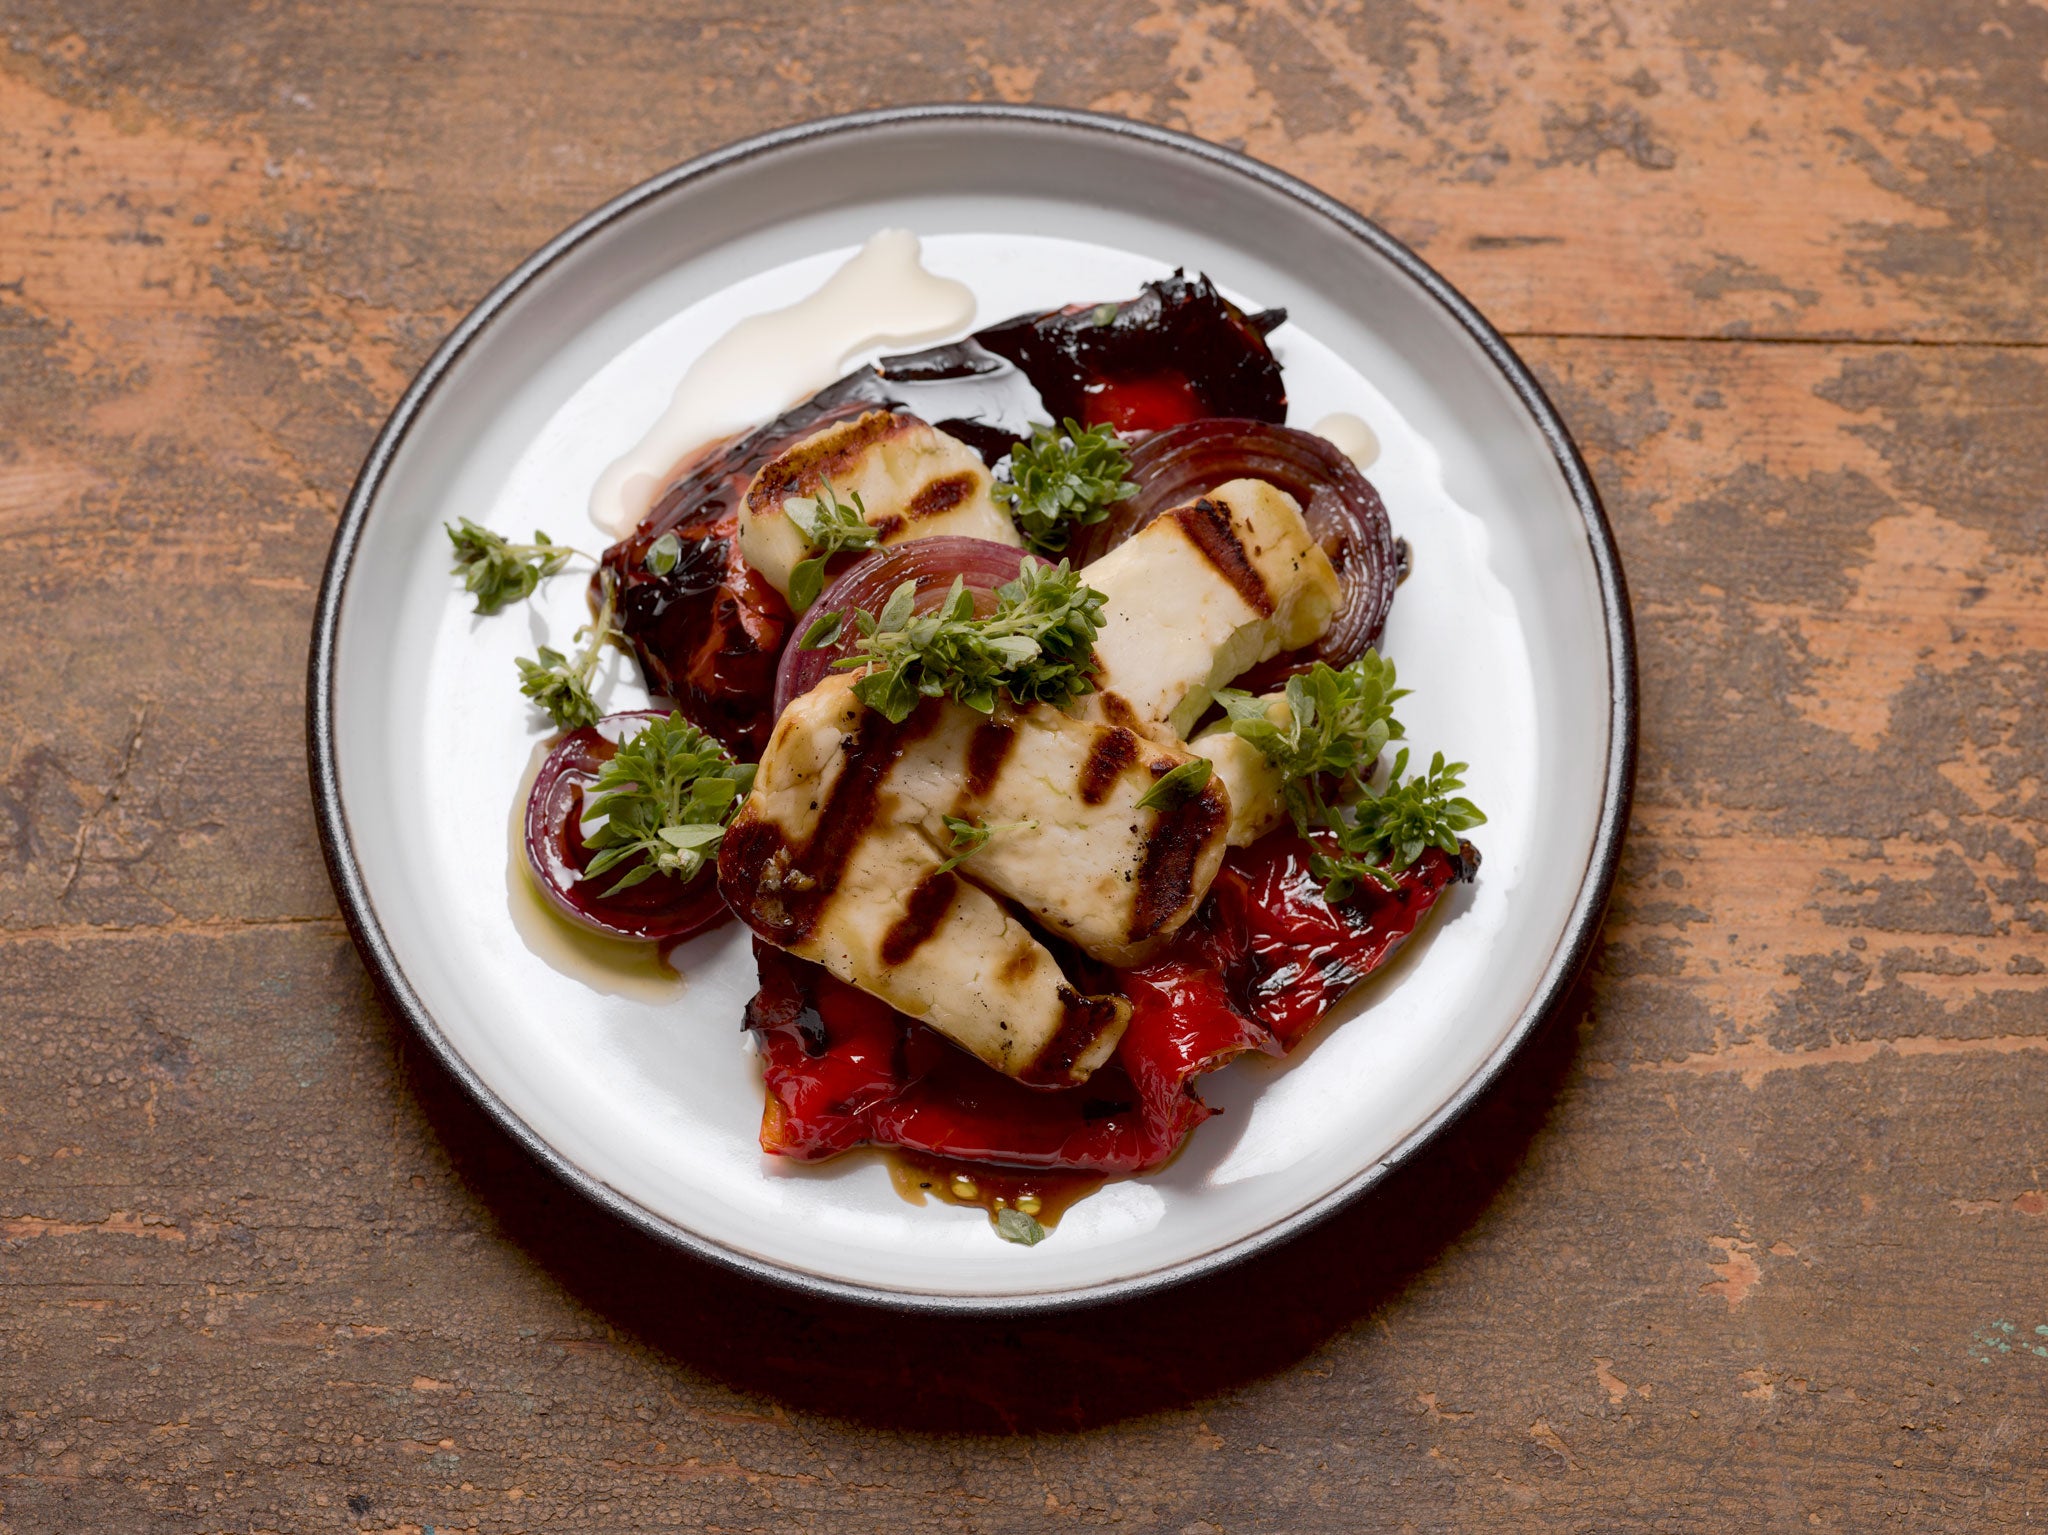 Grilled halloumi with romero peppers and red onions